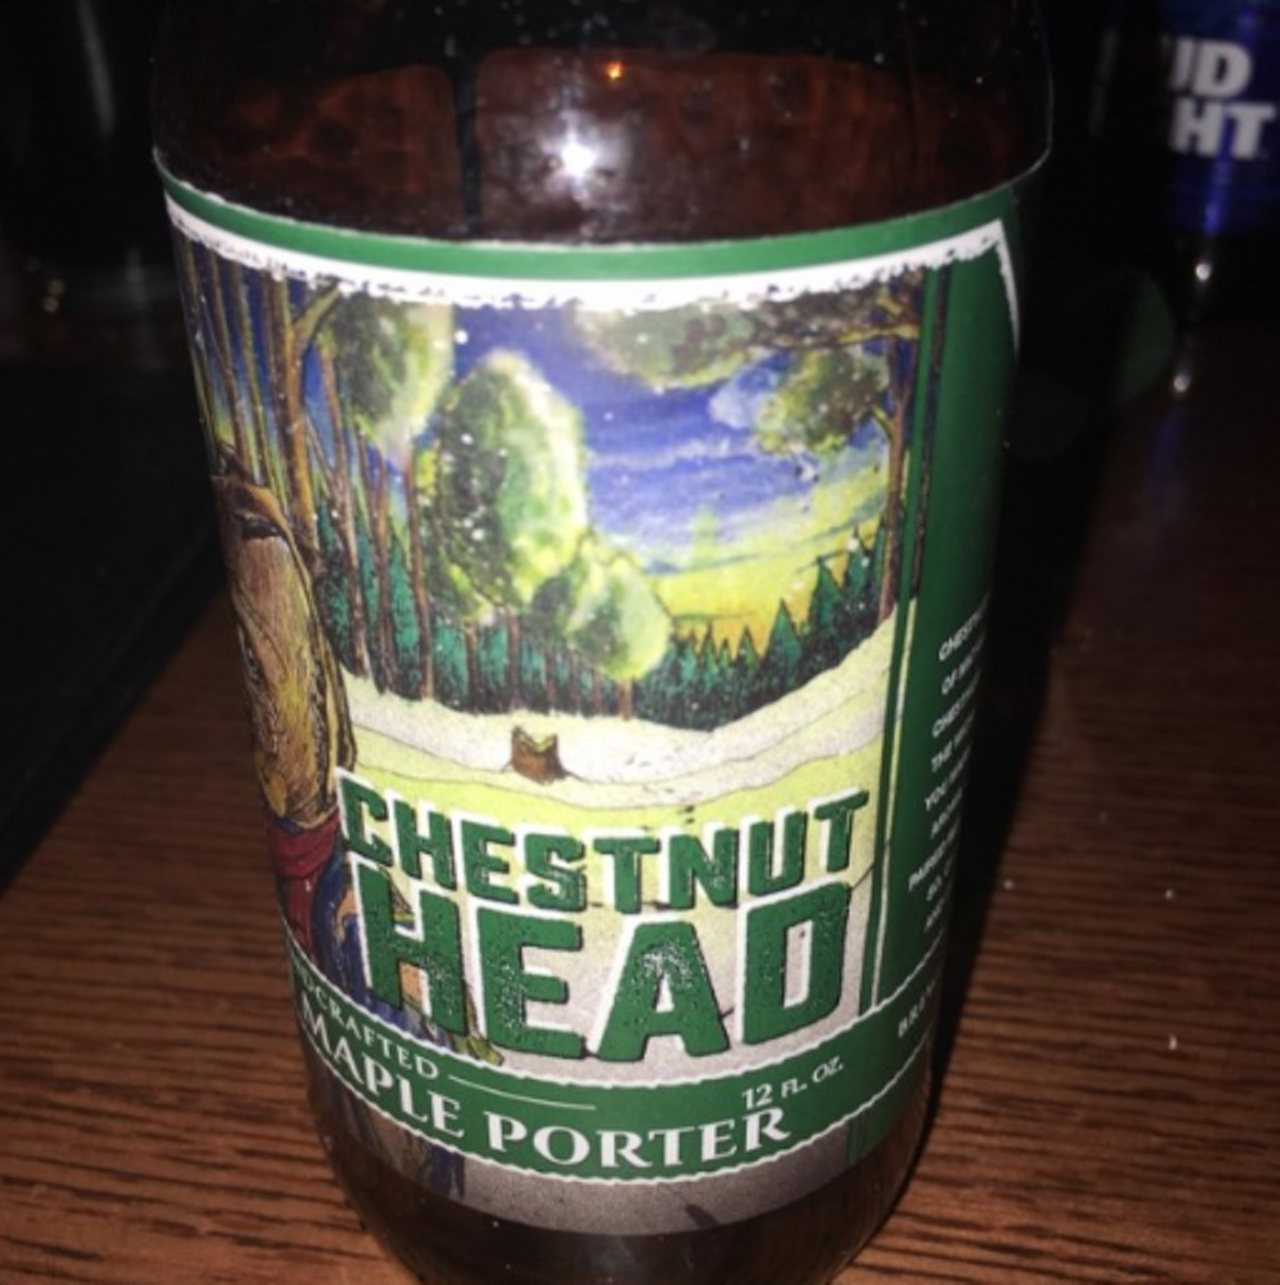 Roak Chestnut Head
Style: Chestnut Maple Porter
ABV: 6.8%
Inspired by Michigan winters of cracking Chestnuts and sitting by a warm fire, this chestnut maple porter is a great winter beer, plus it&#146;s brewed right in metro Detroit at Roak.